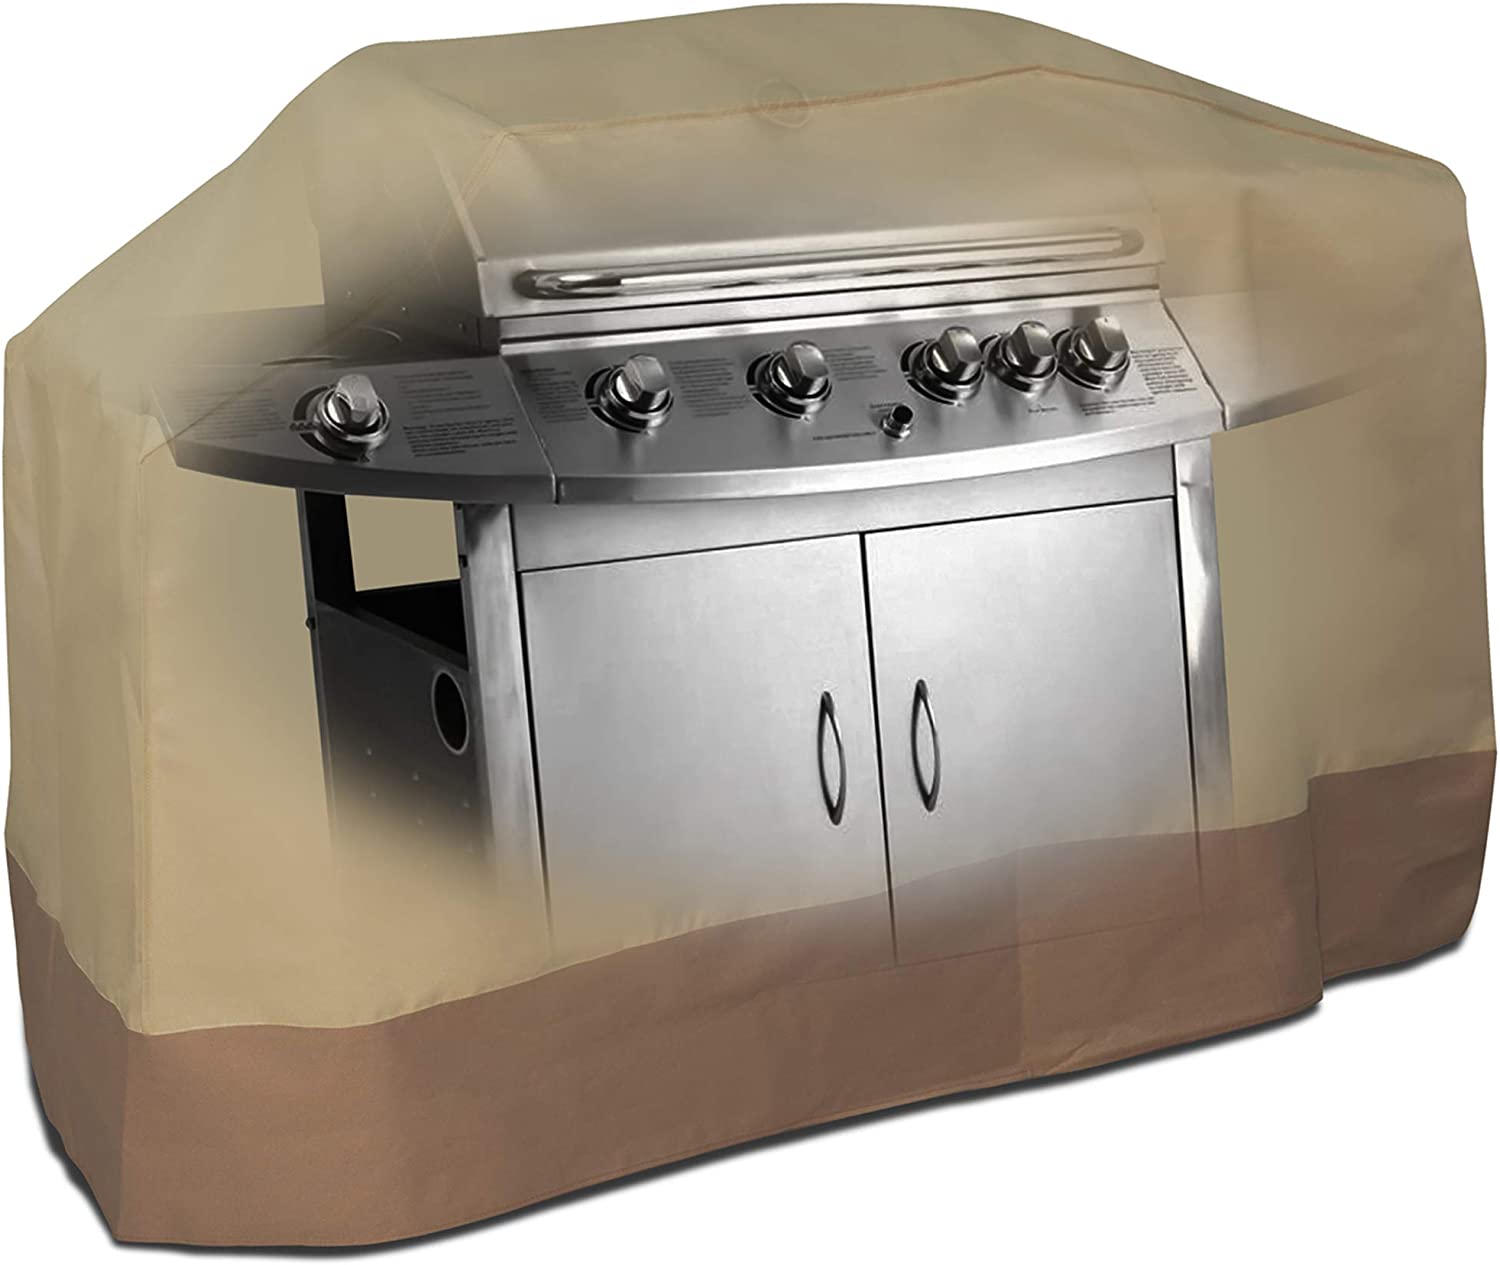 Den Haven Grill Cover Heavy Duty Waterproof BBQ Expert Protection (59-inch) - image 5 of 8